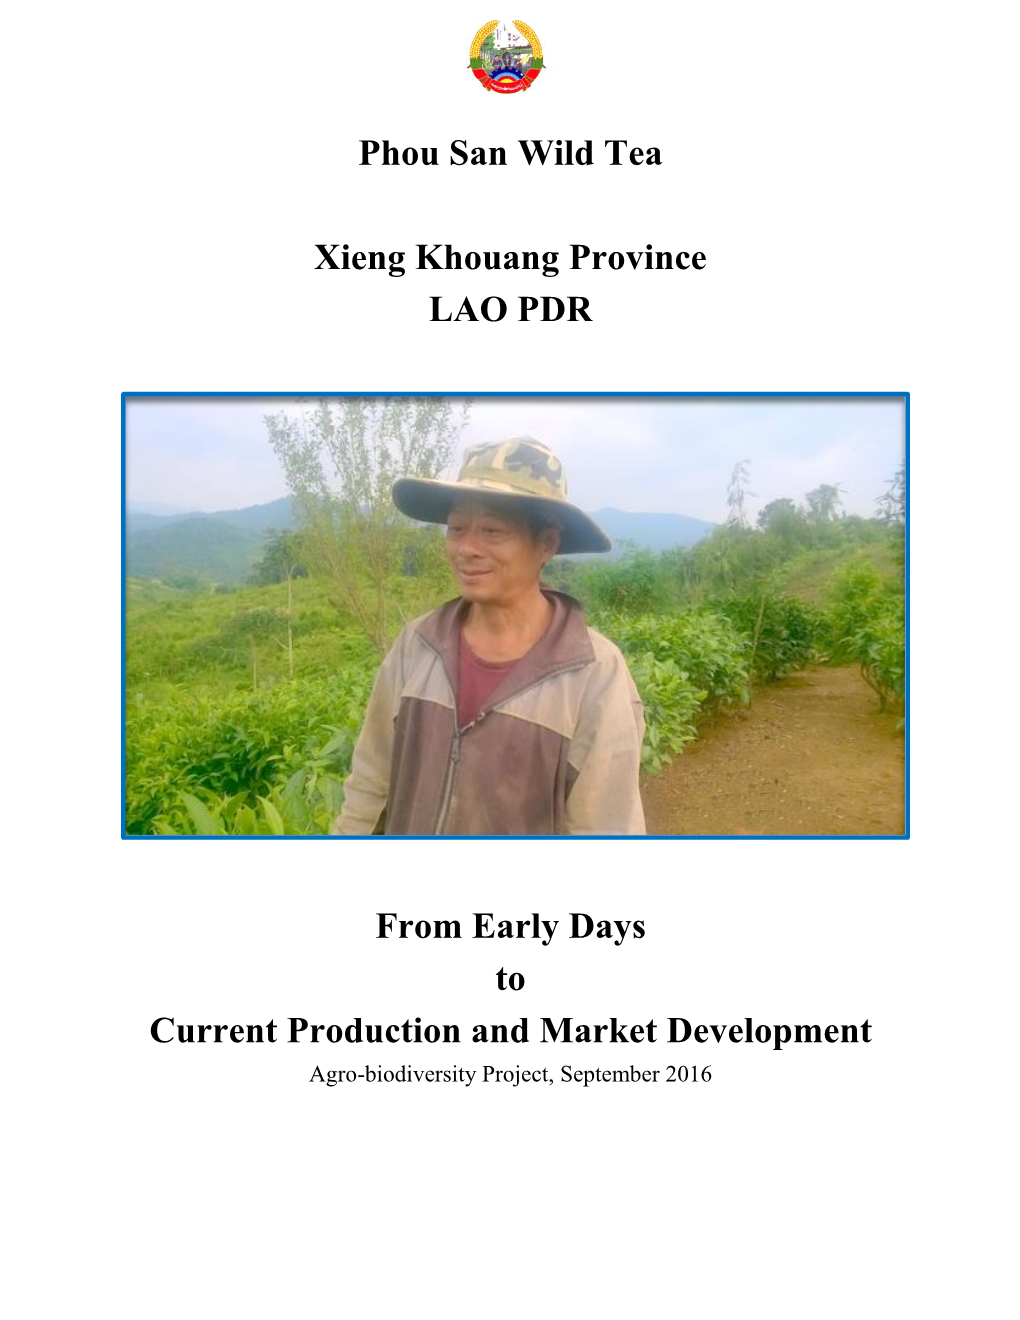 Phou San Wild Tea Xieng Khouang Province LAO PDR from Early Days to Current Production and Market Development